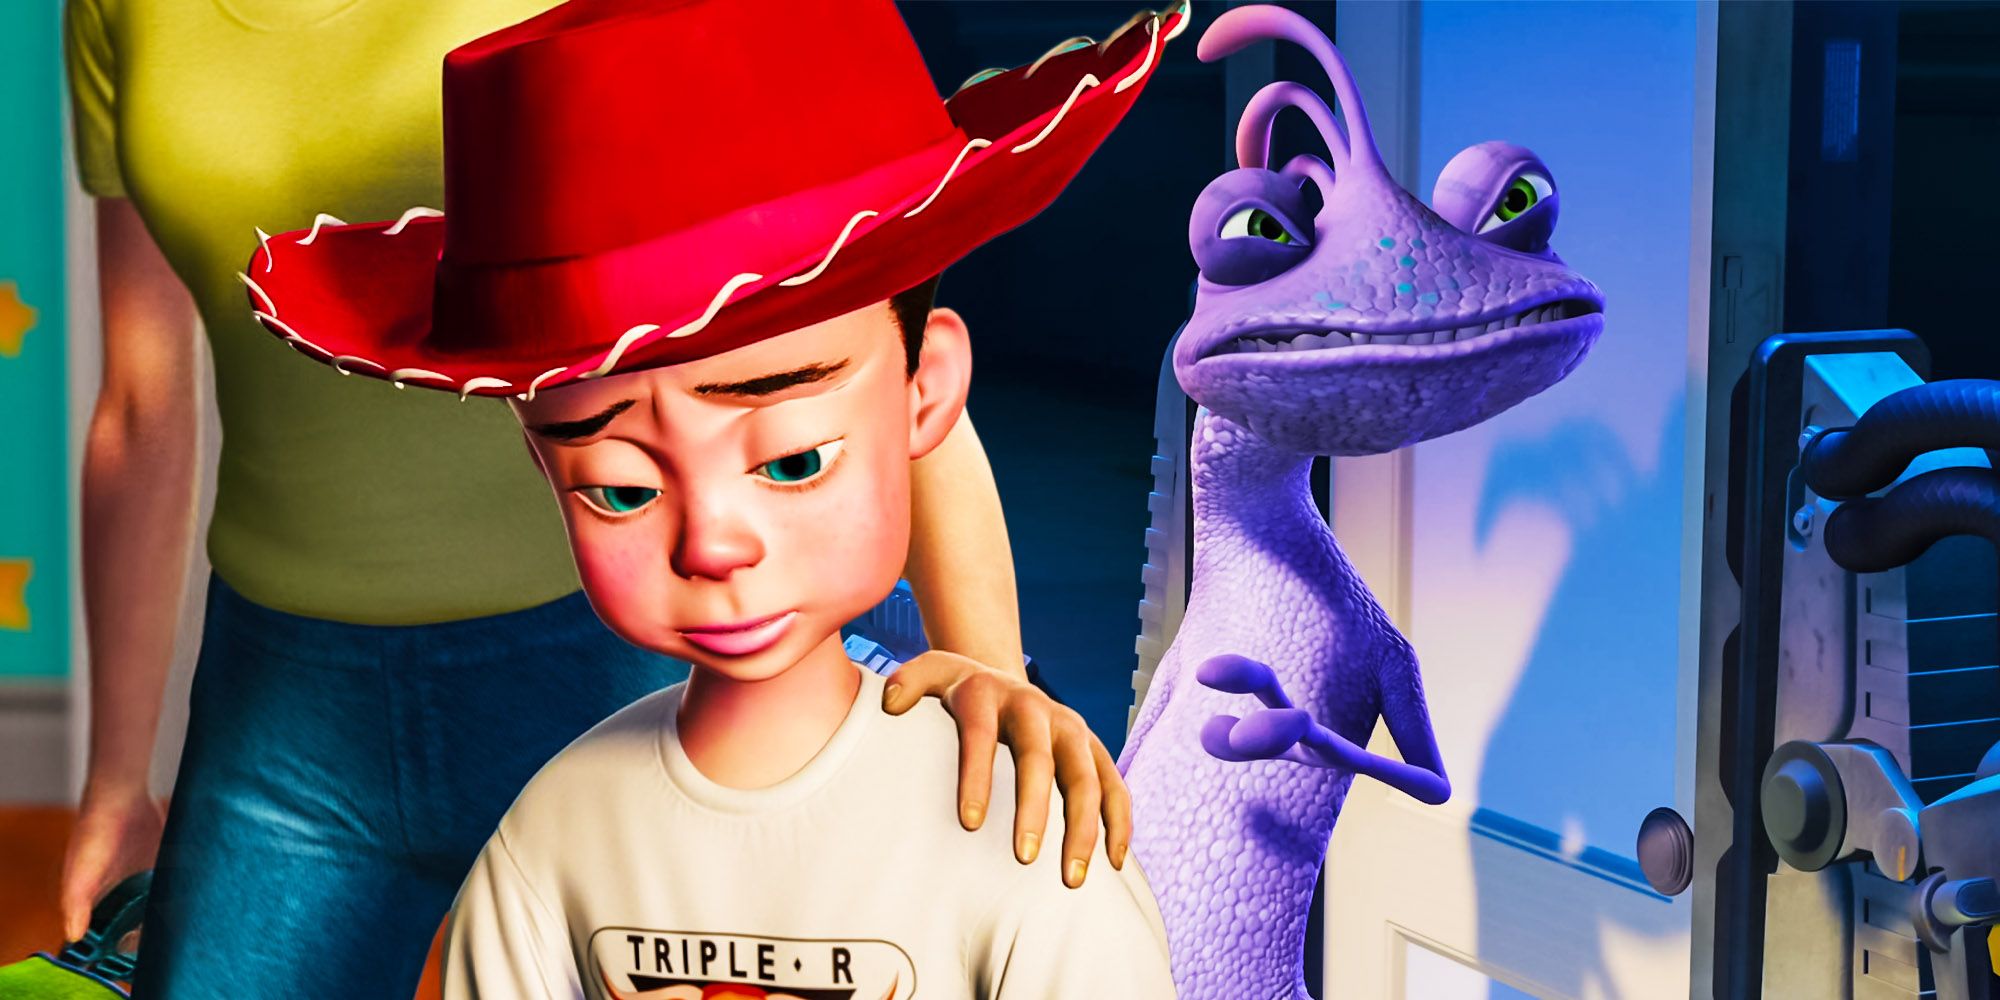 Toy Story Subtly Paid Off A Dark Monsters Inc. Moment (& You Probably Missed It)